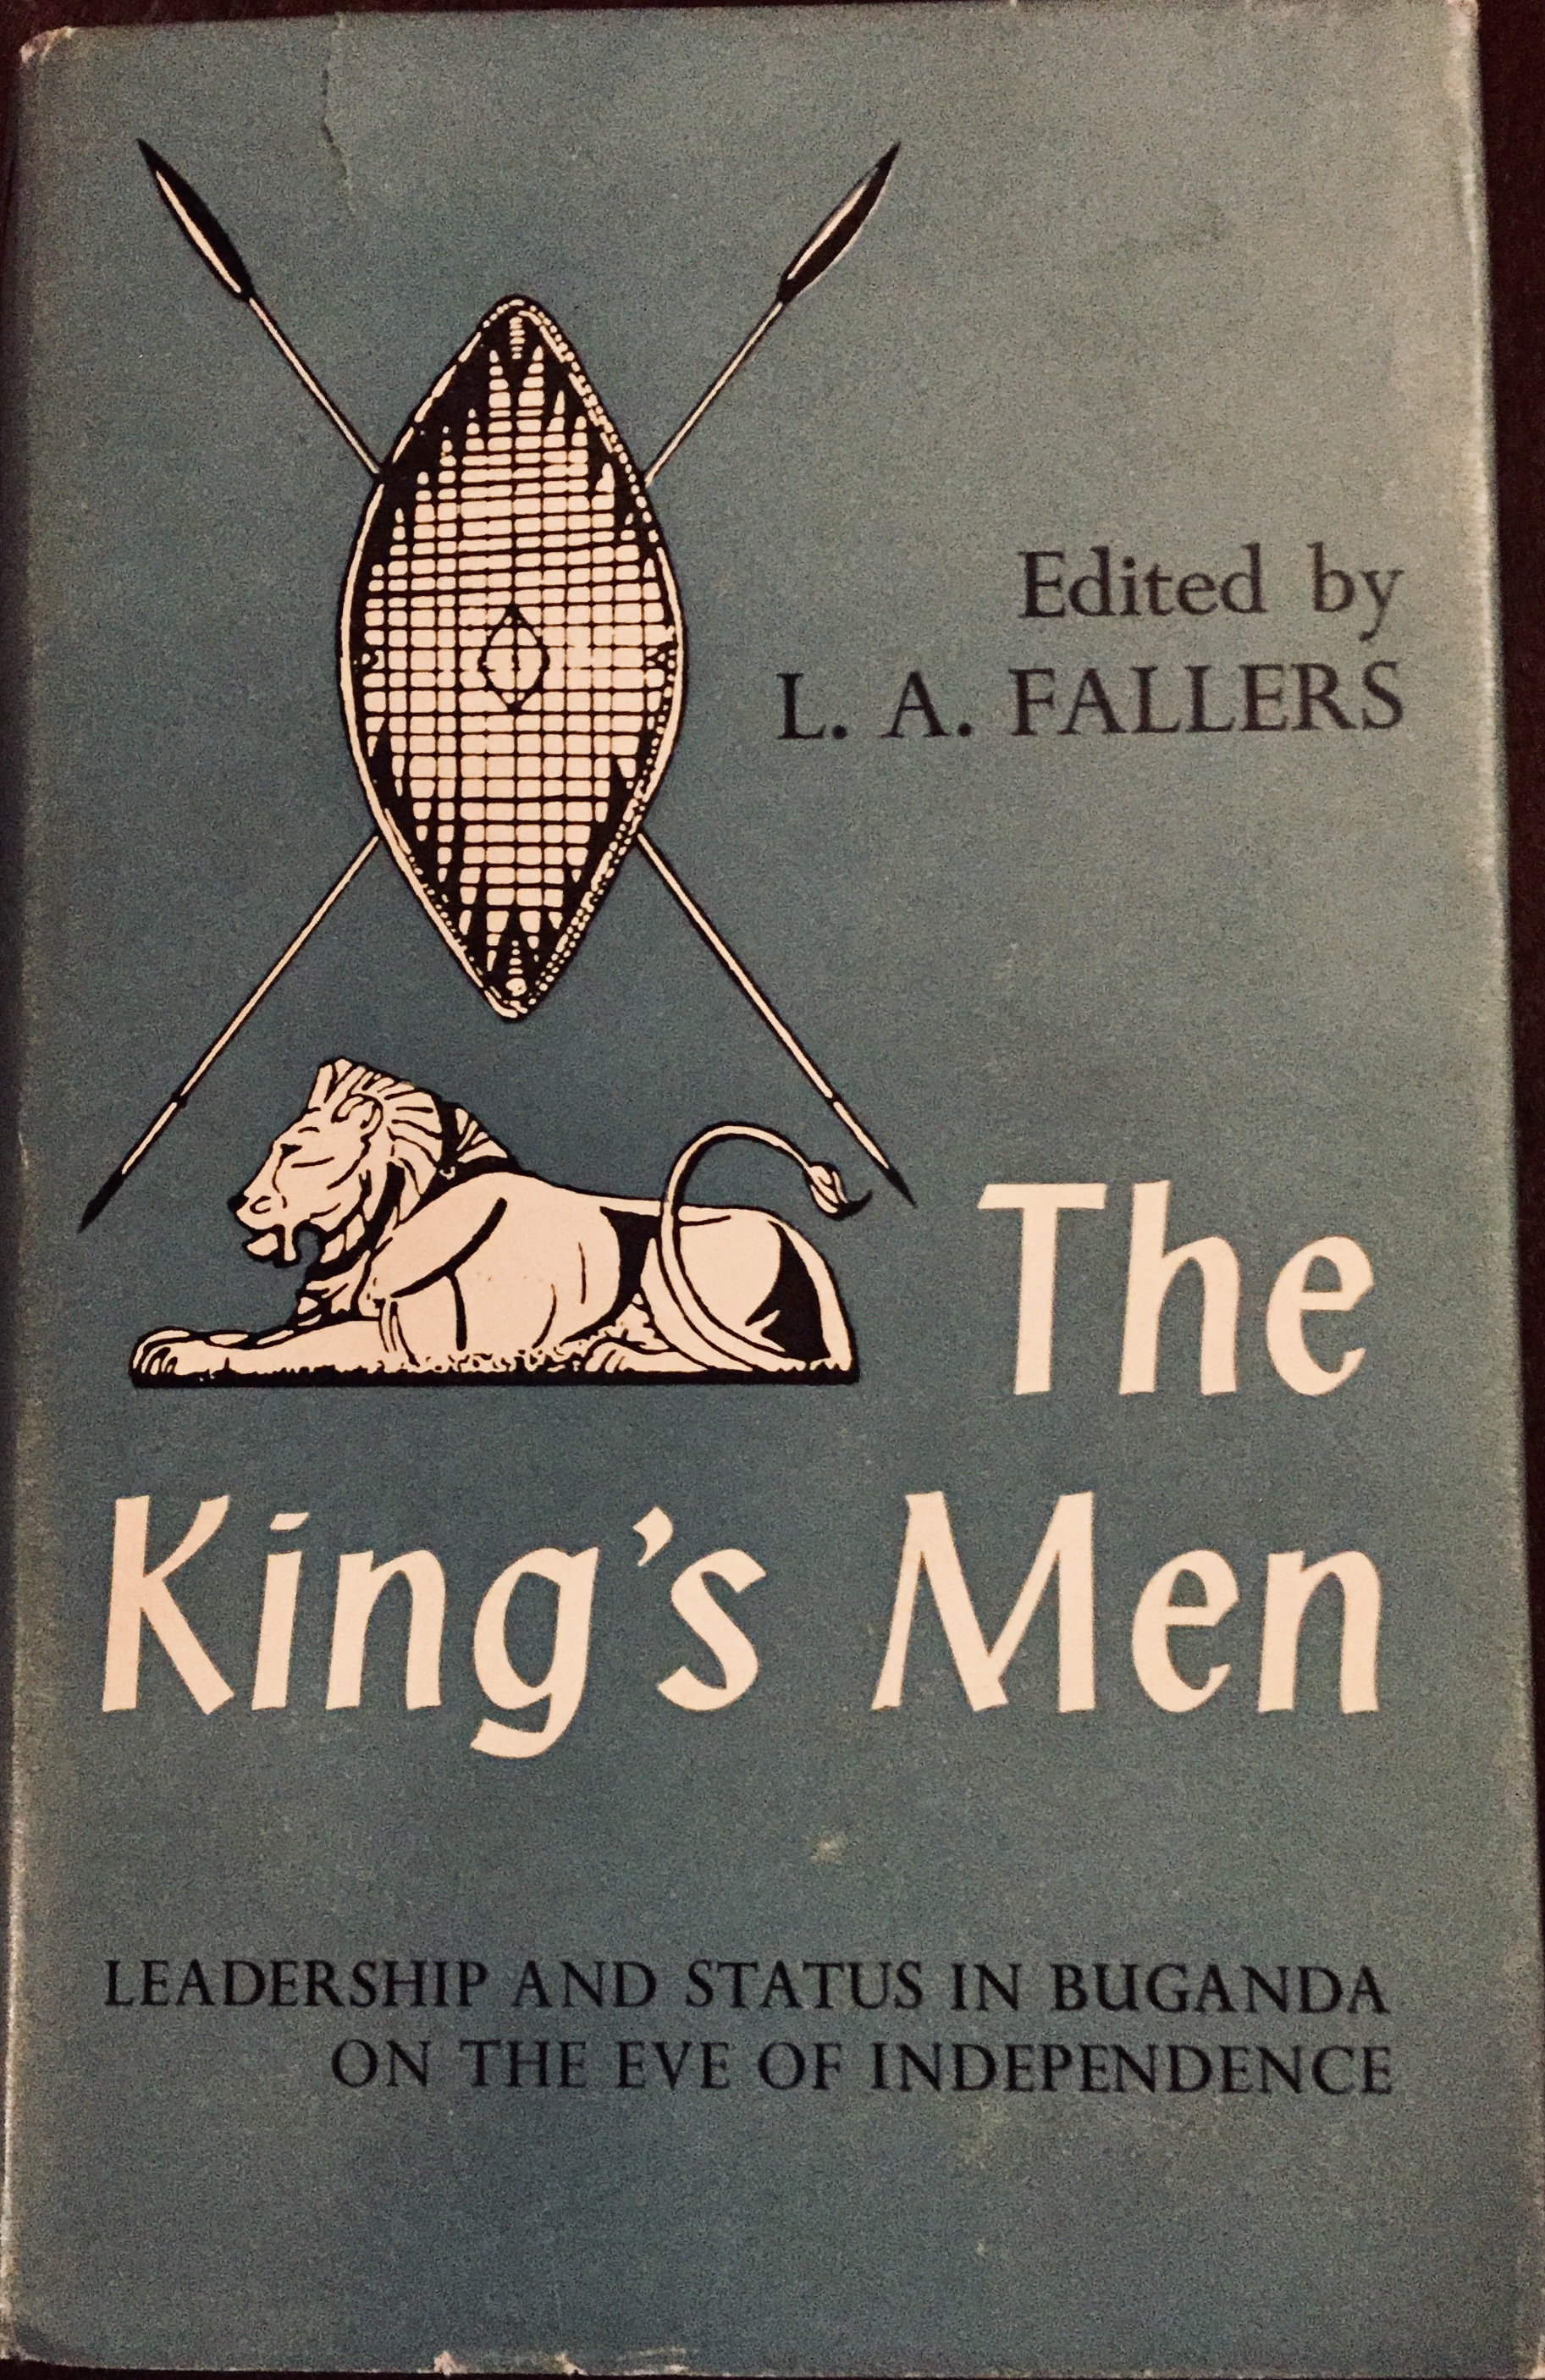 The King’s Men: Leadership and Status in Buganda on the Eve of Independence - Edited by L.A. Fallers (1964)